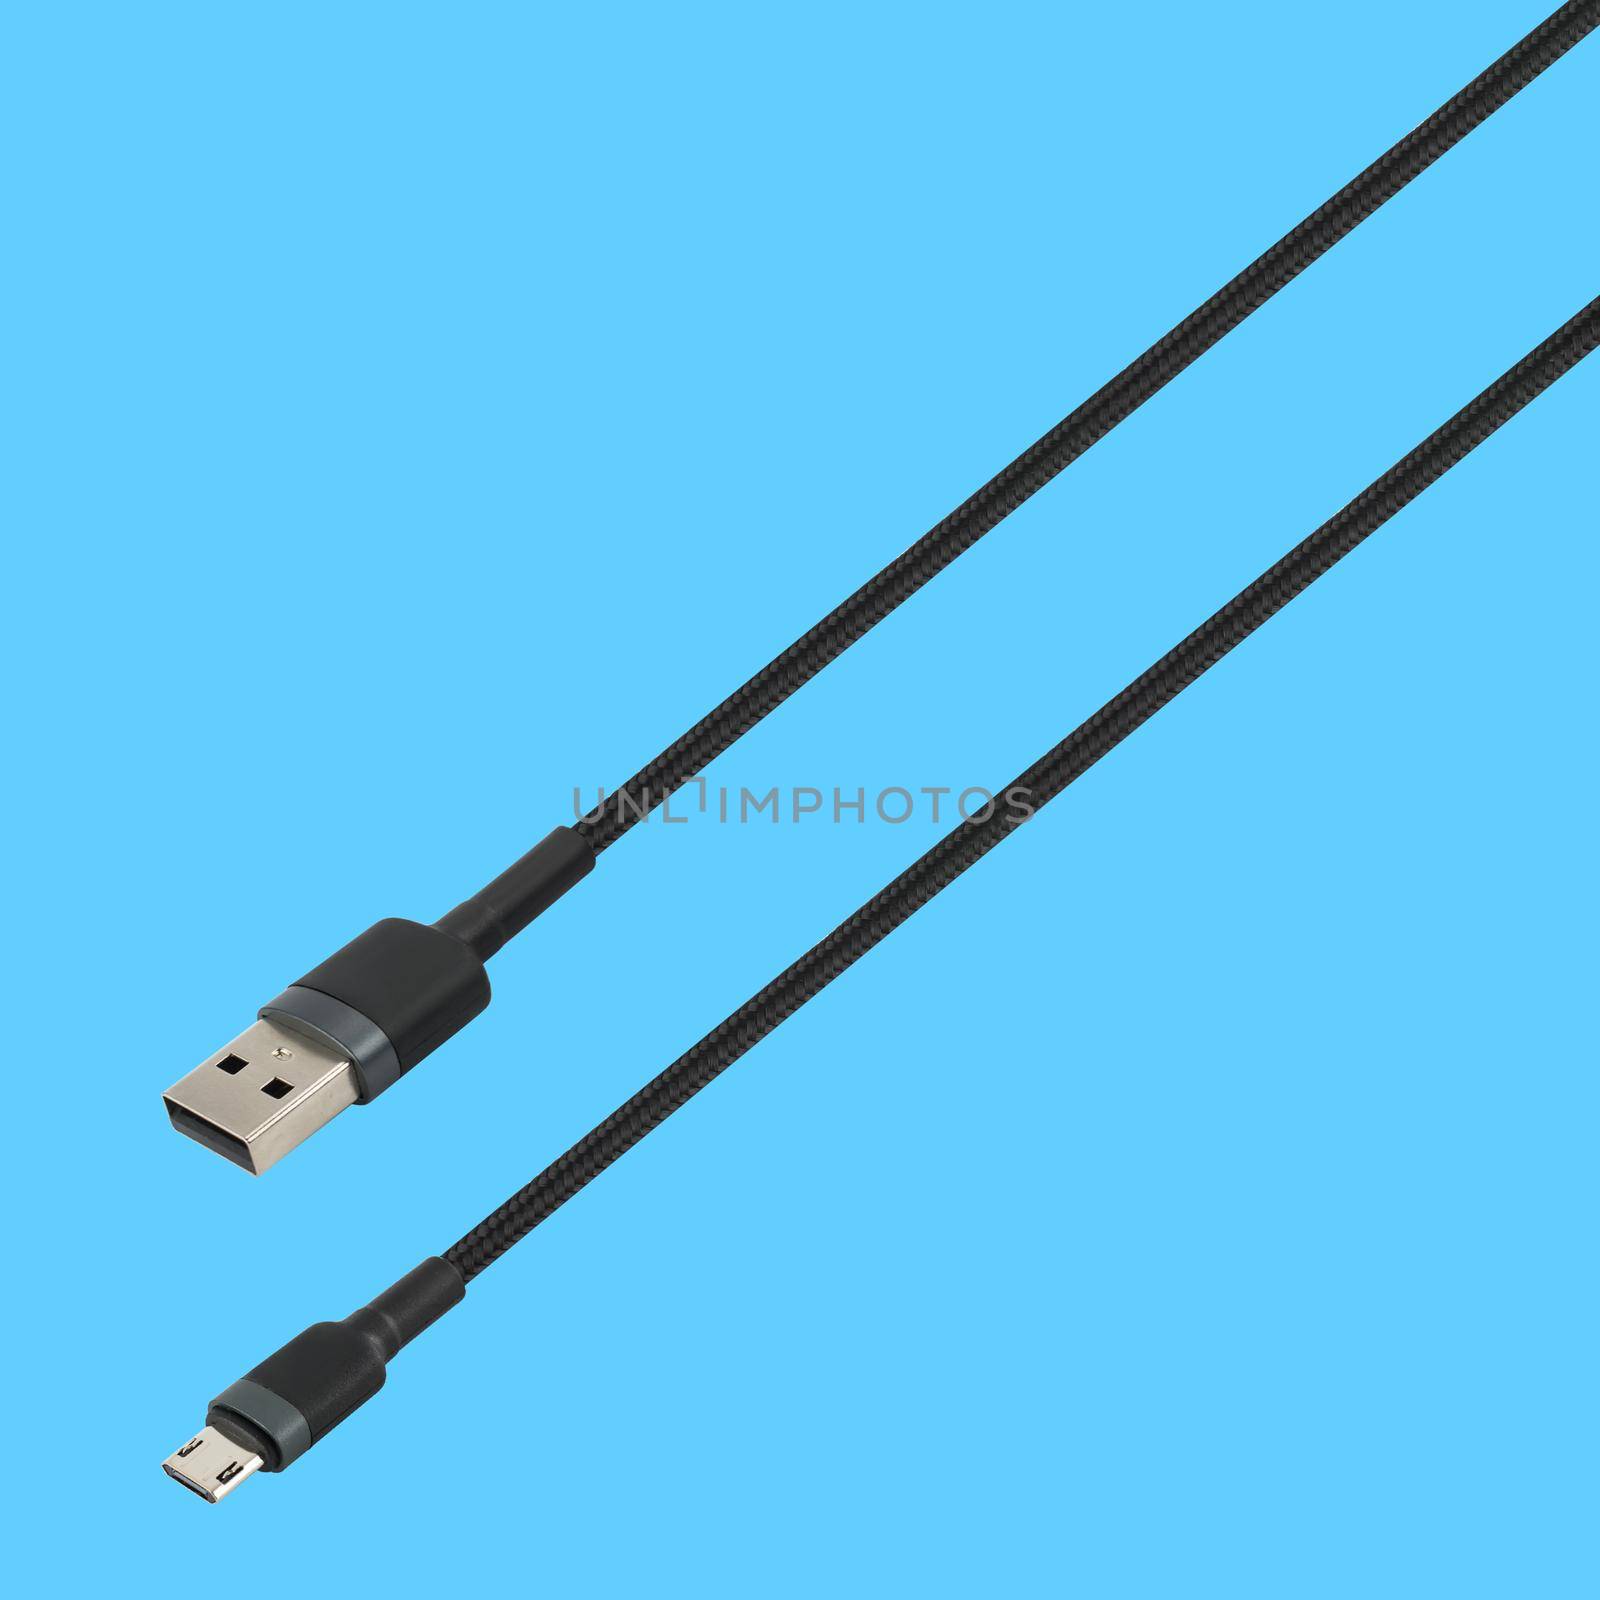 Cable with USB and micro USB connector, on a blue background